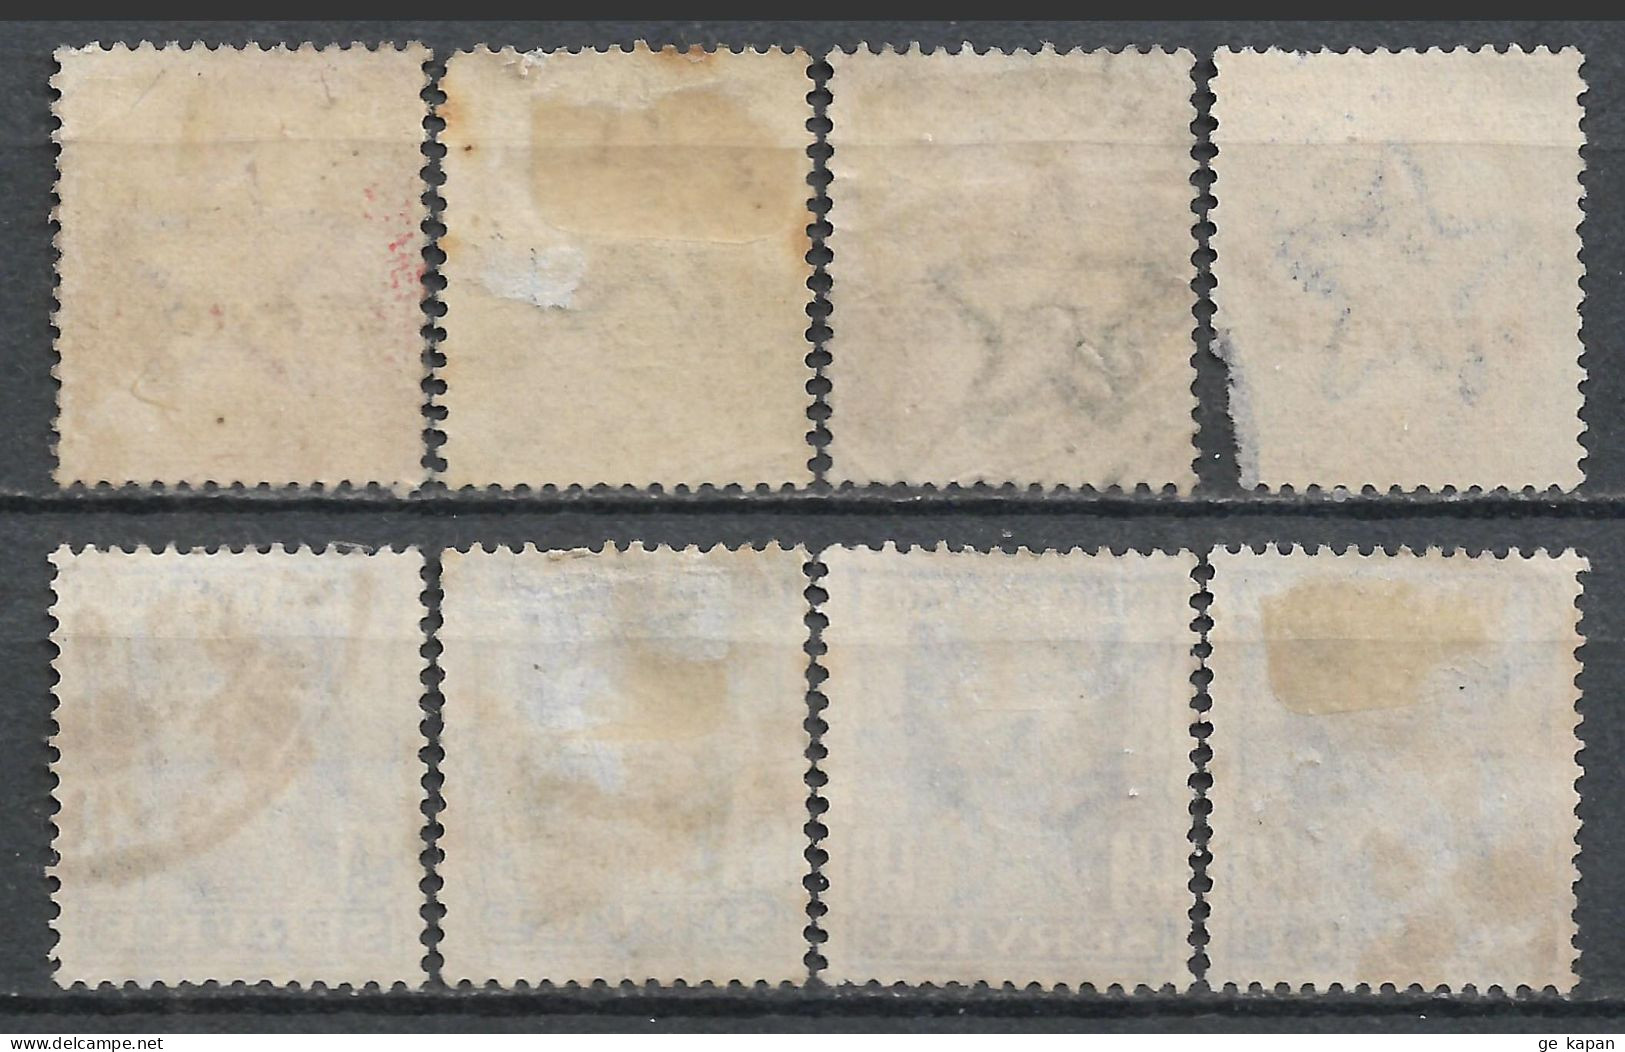 1912-1942 INDIA Officials Set Of 1 MLH + 7 Used Stamps (Michel # 53,55,65,104,105,108) CV €3.10 - 1911-35 Roi Georges V